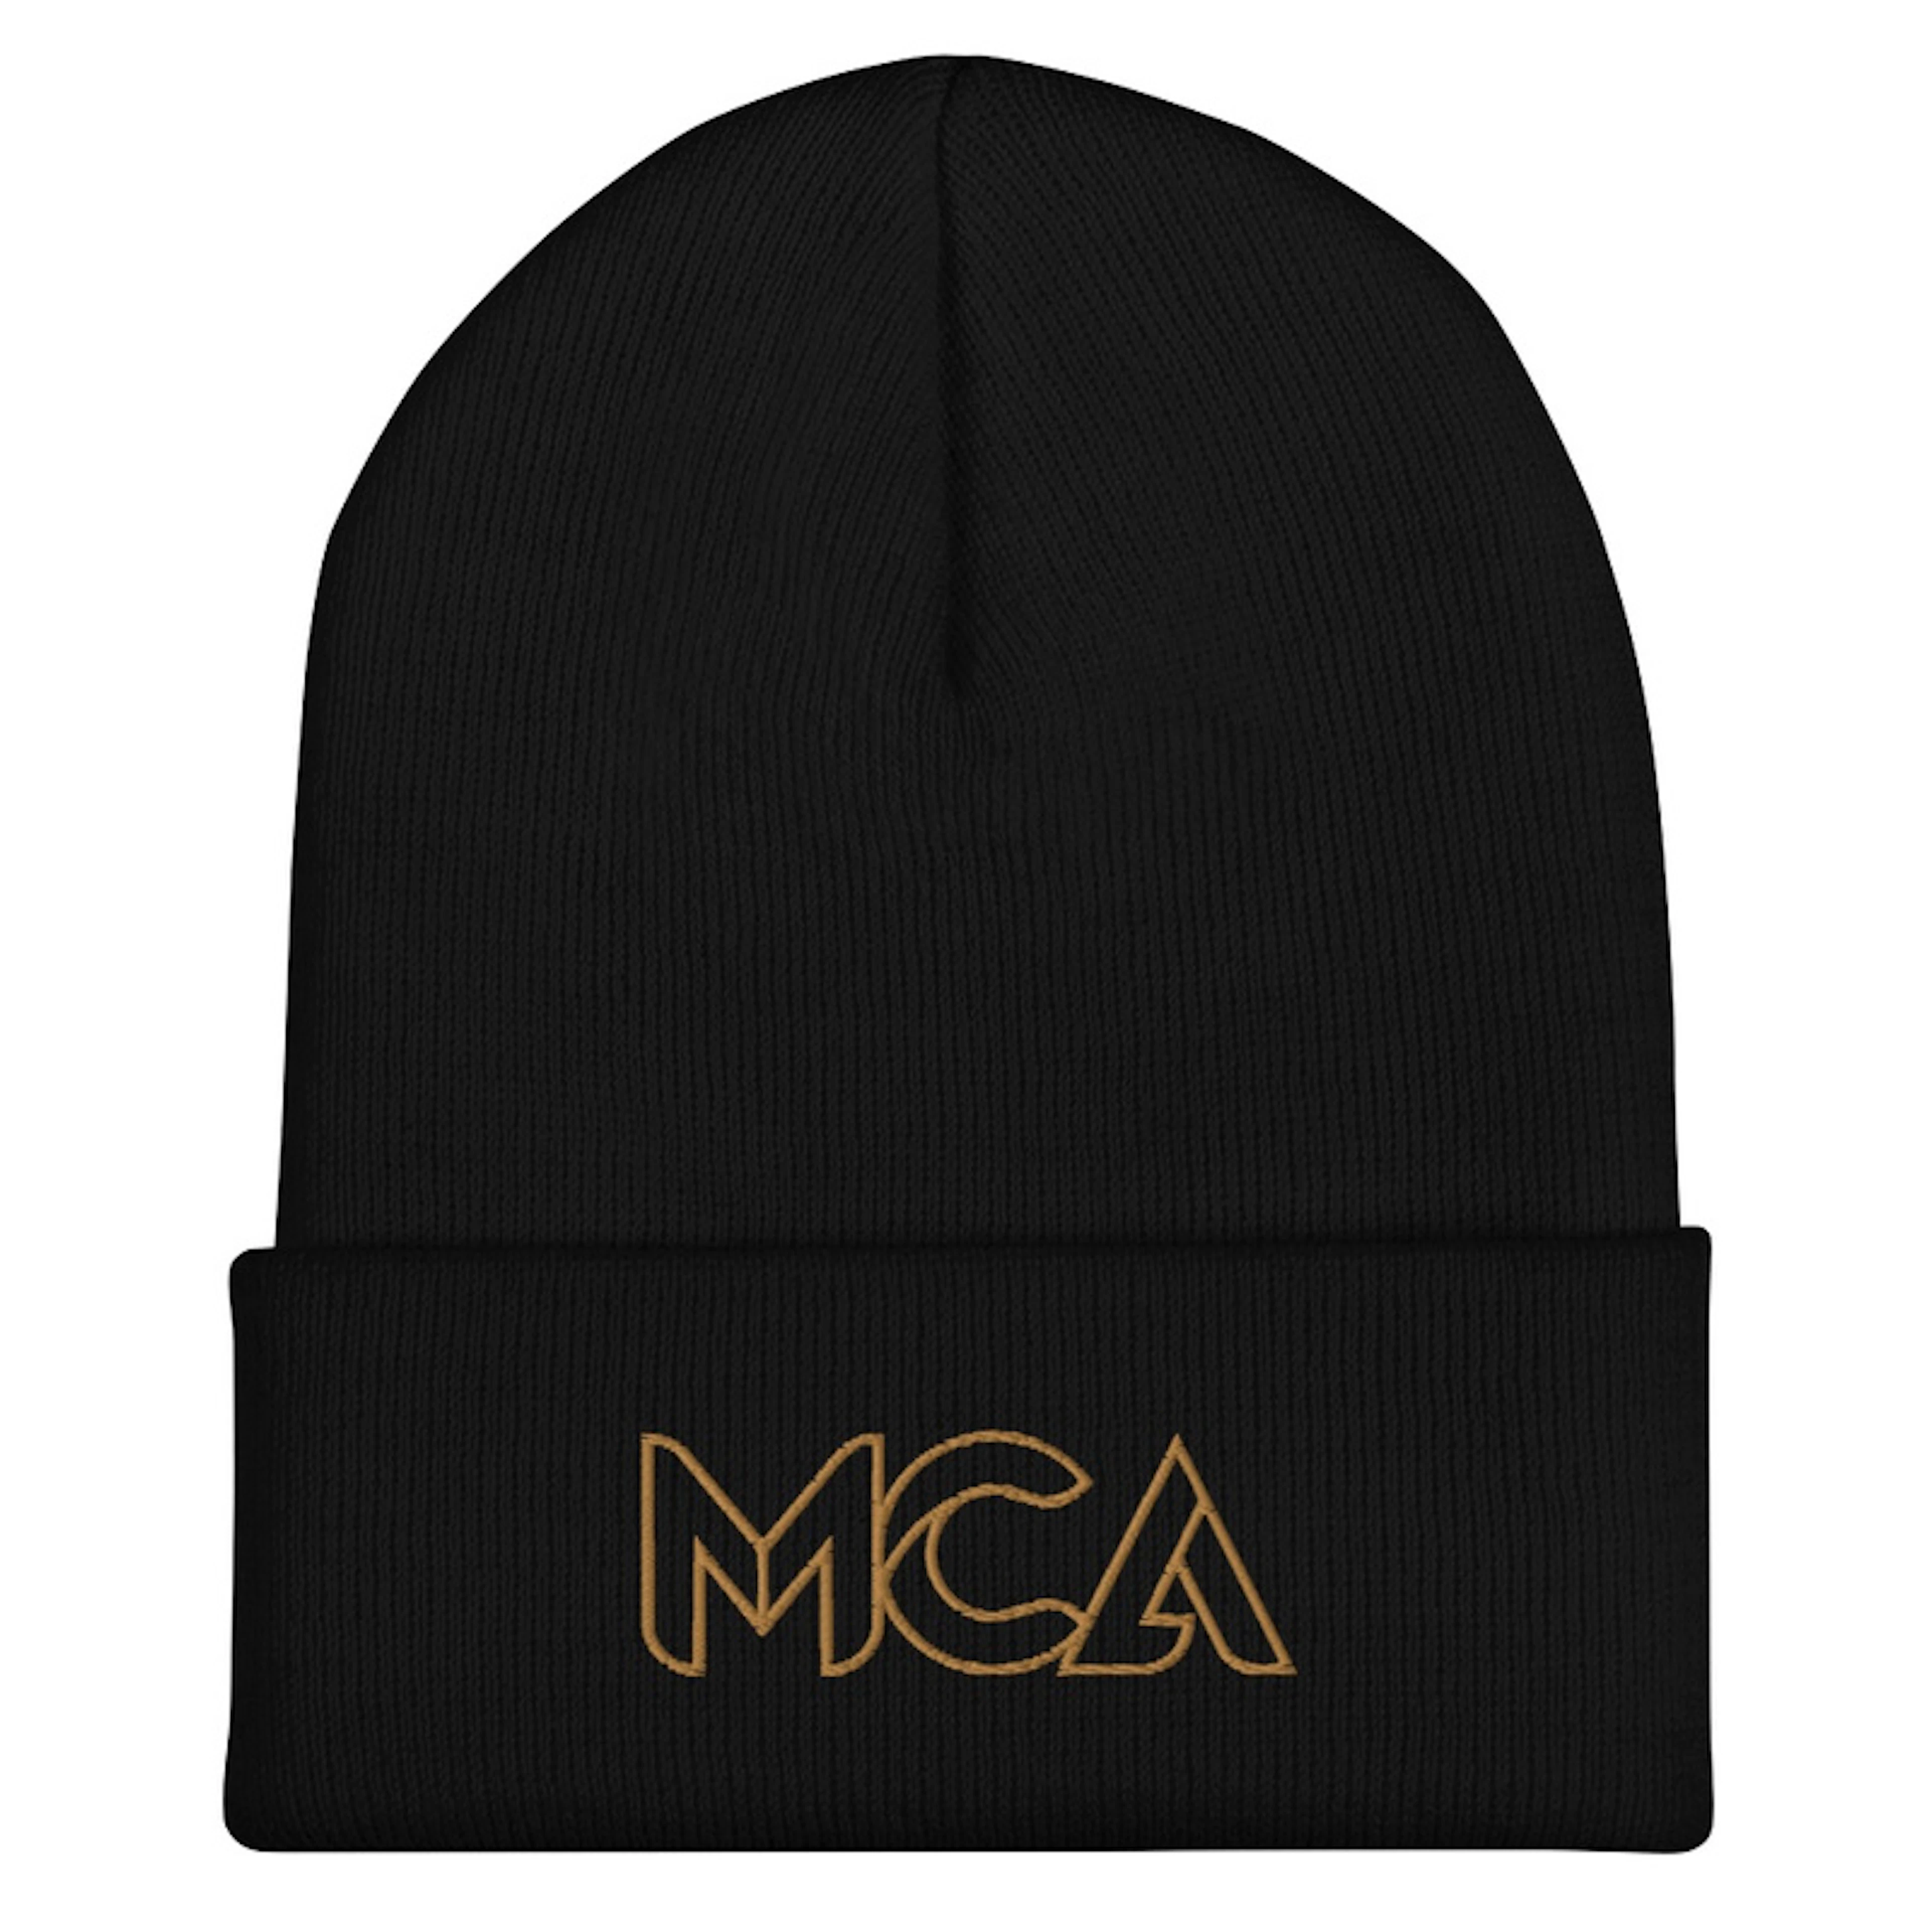 MCA logo embroidered knit hat